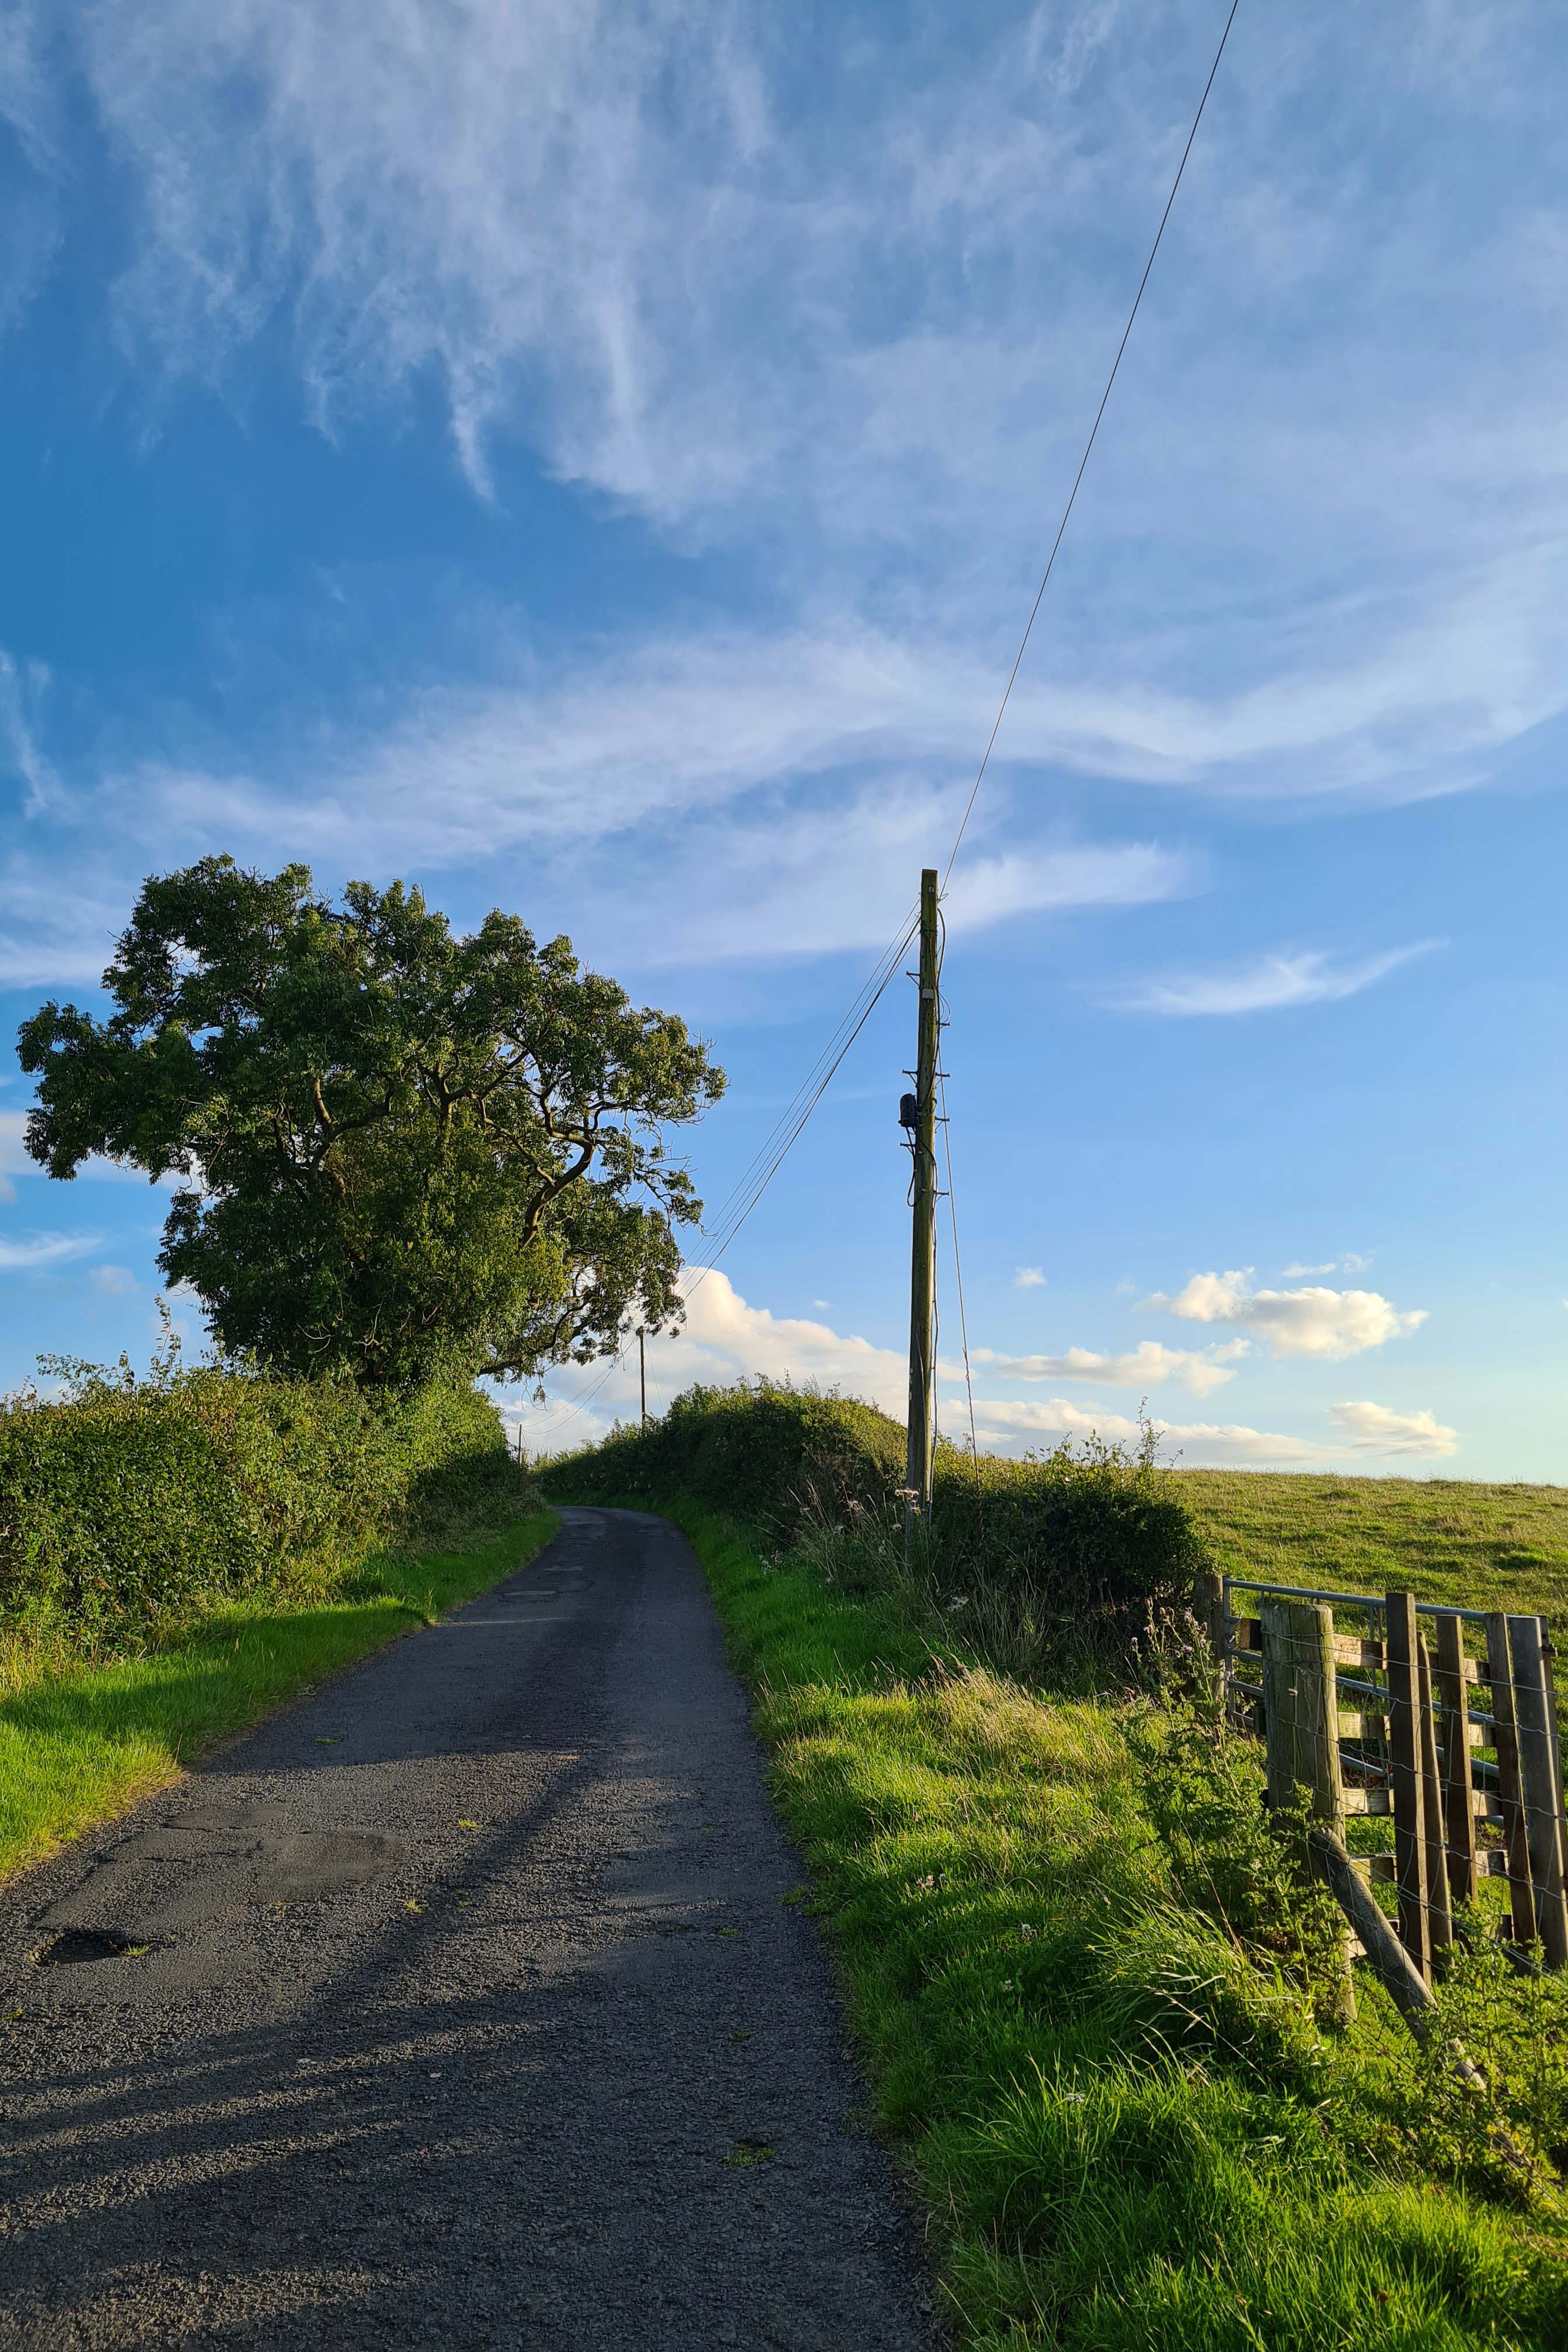 Uphill country road, tree, blue sky and white clouds